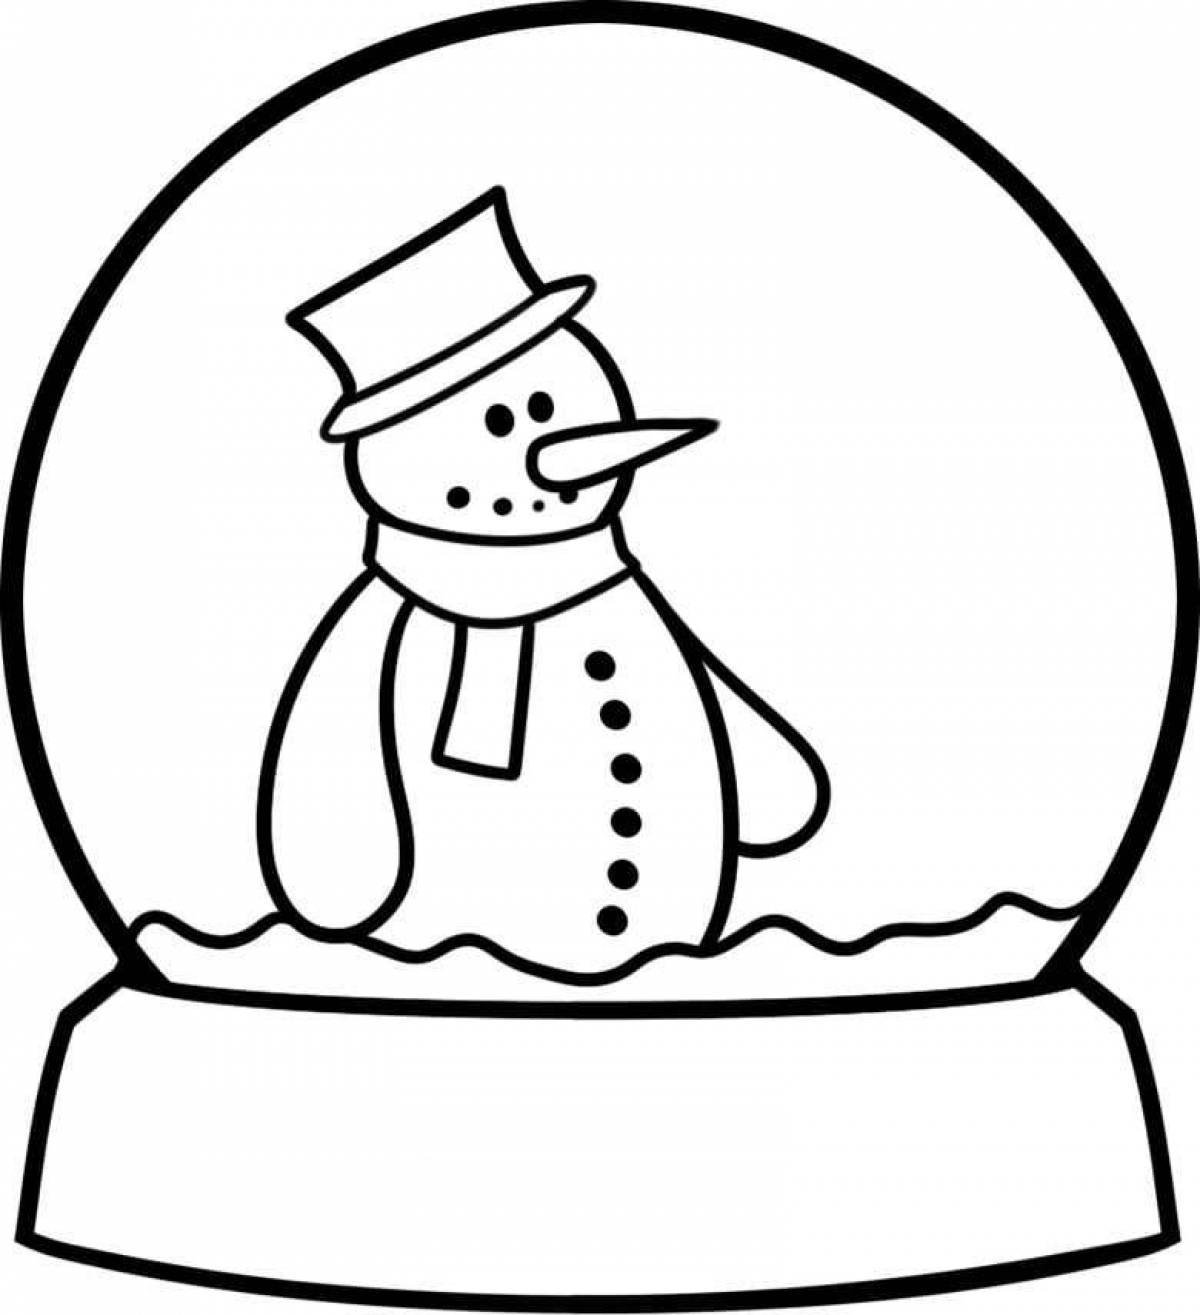 Shiny snowball coloring page